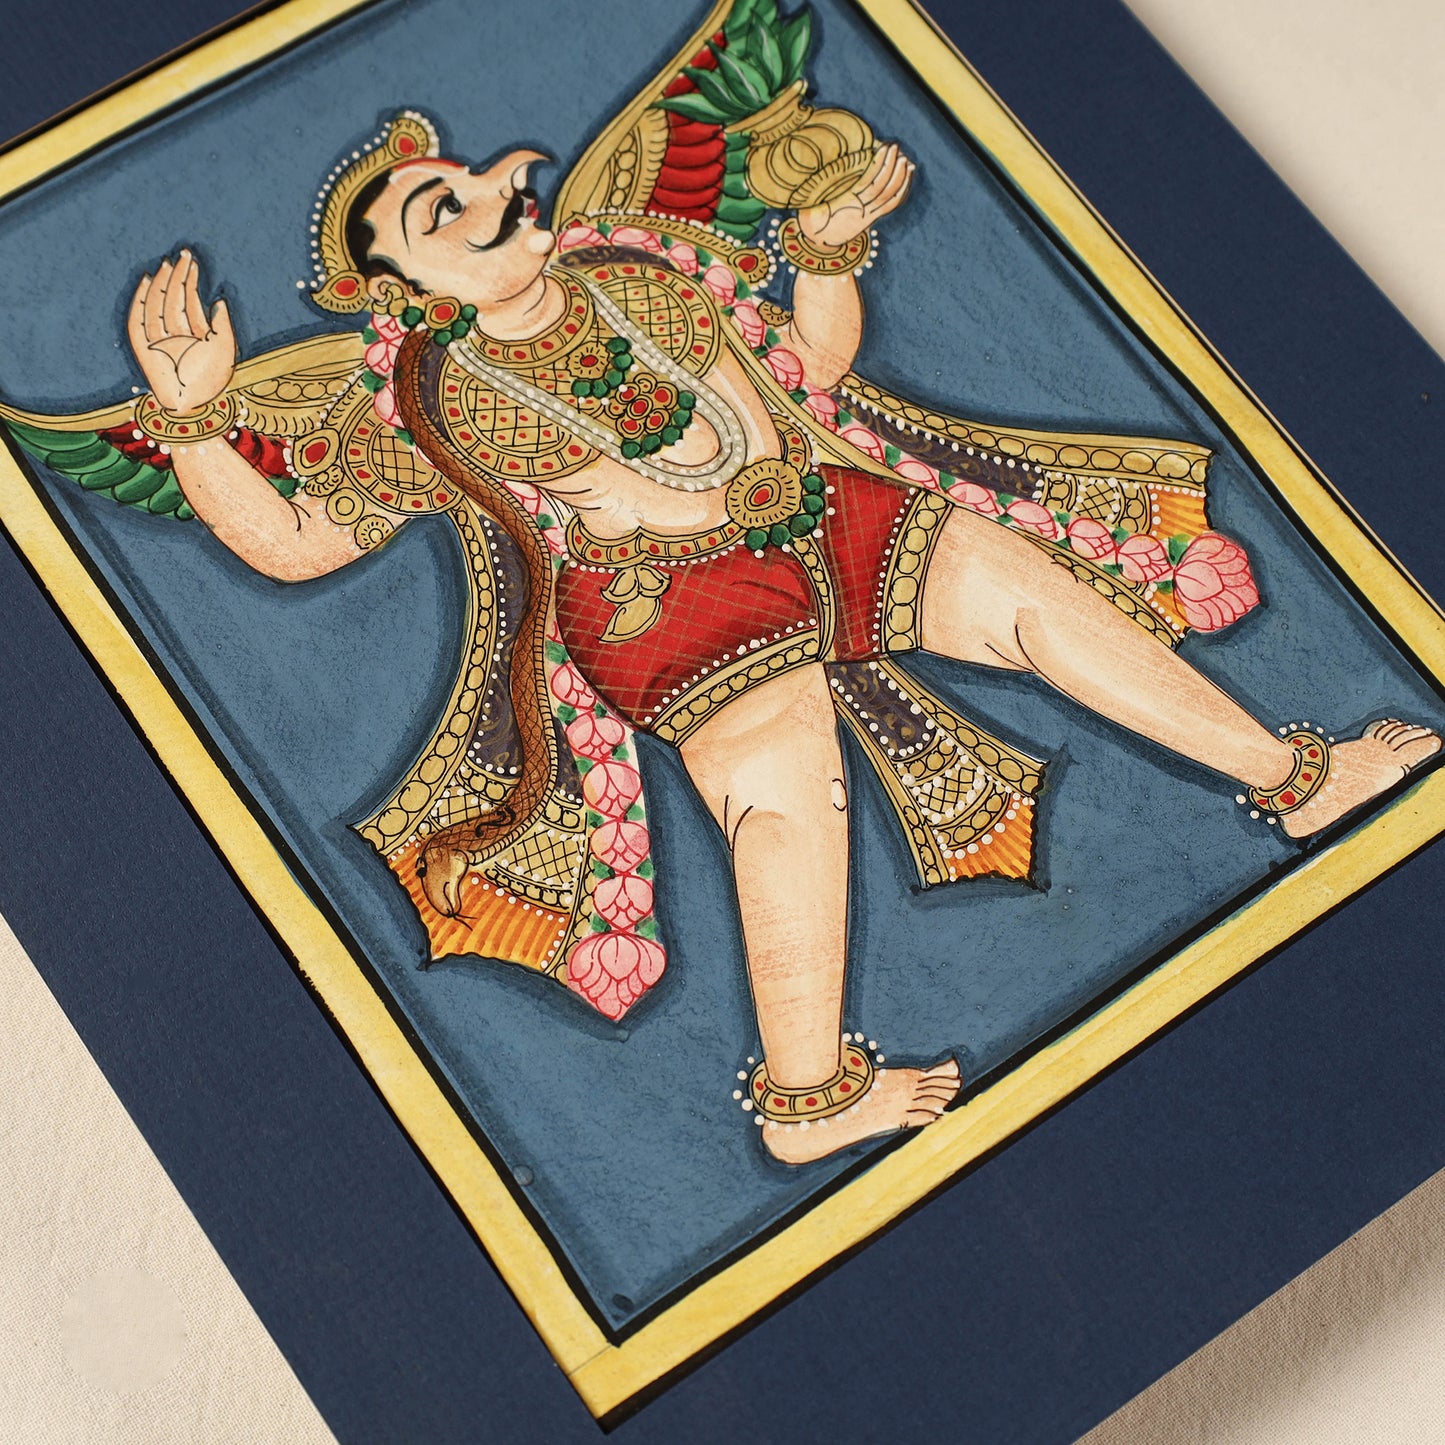 Garuna - Traditional Mysore Painting by JS Sridhar Rao (10 x 8 in)